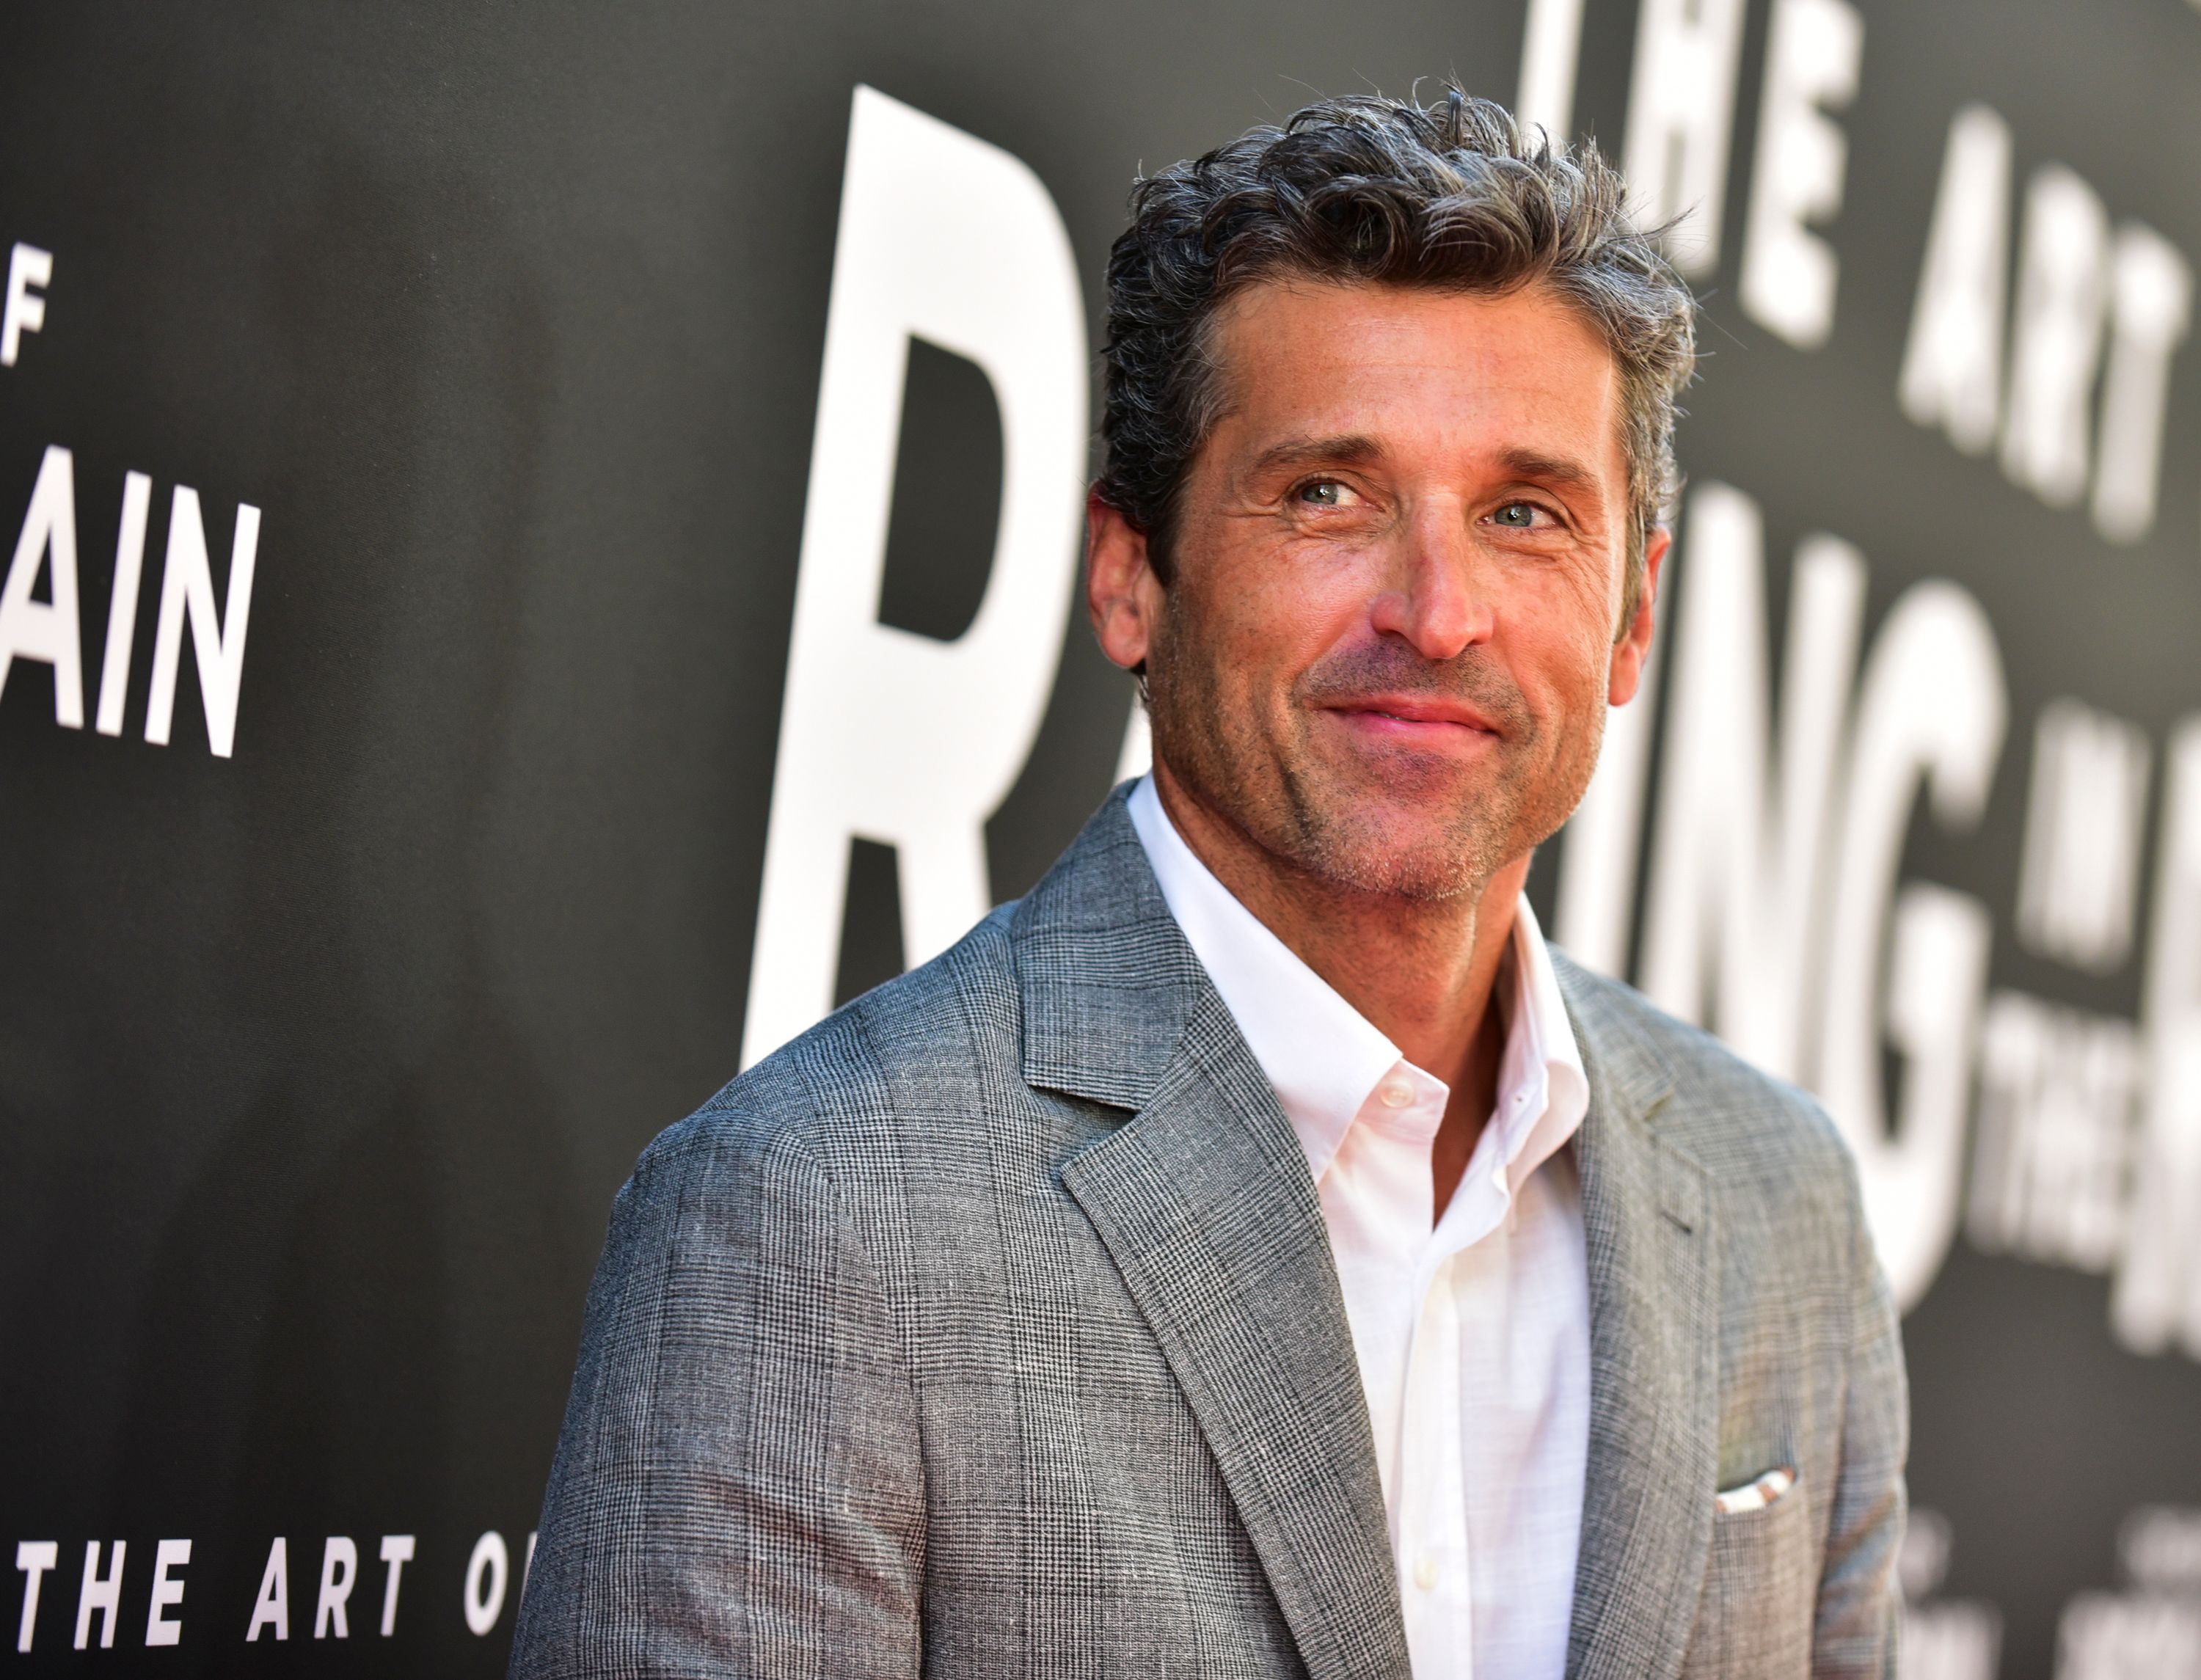 Patrick Dempsey at the premiere of 20th Century Fox's "The Art of Racing in the Rain" at El Capitan Theatre on August 01, 2019 | Photo: Getty Images